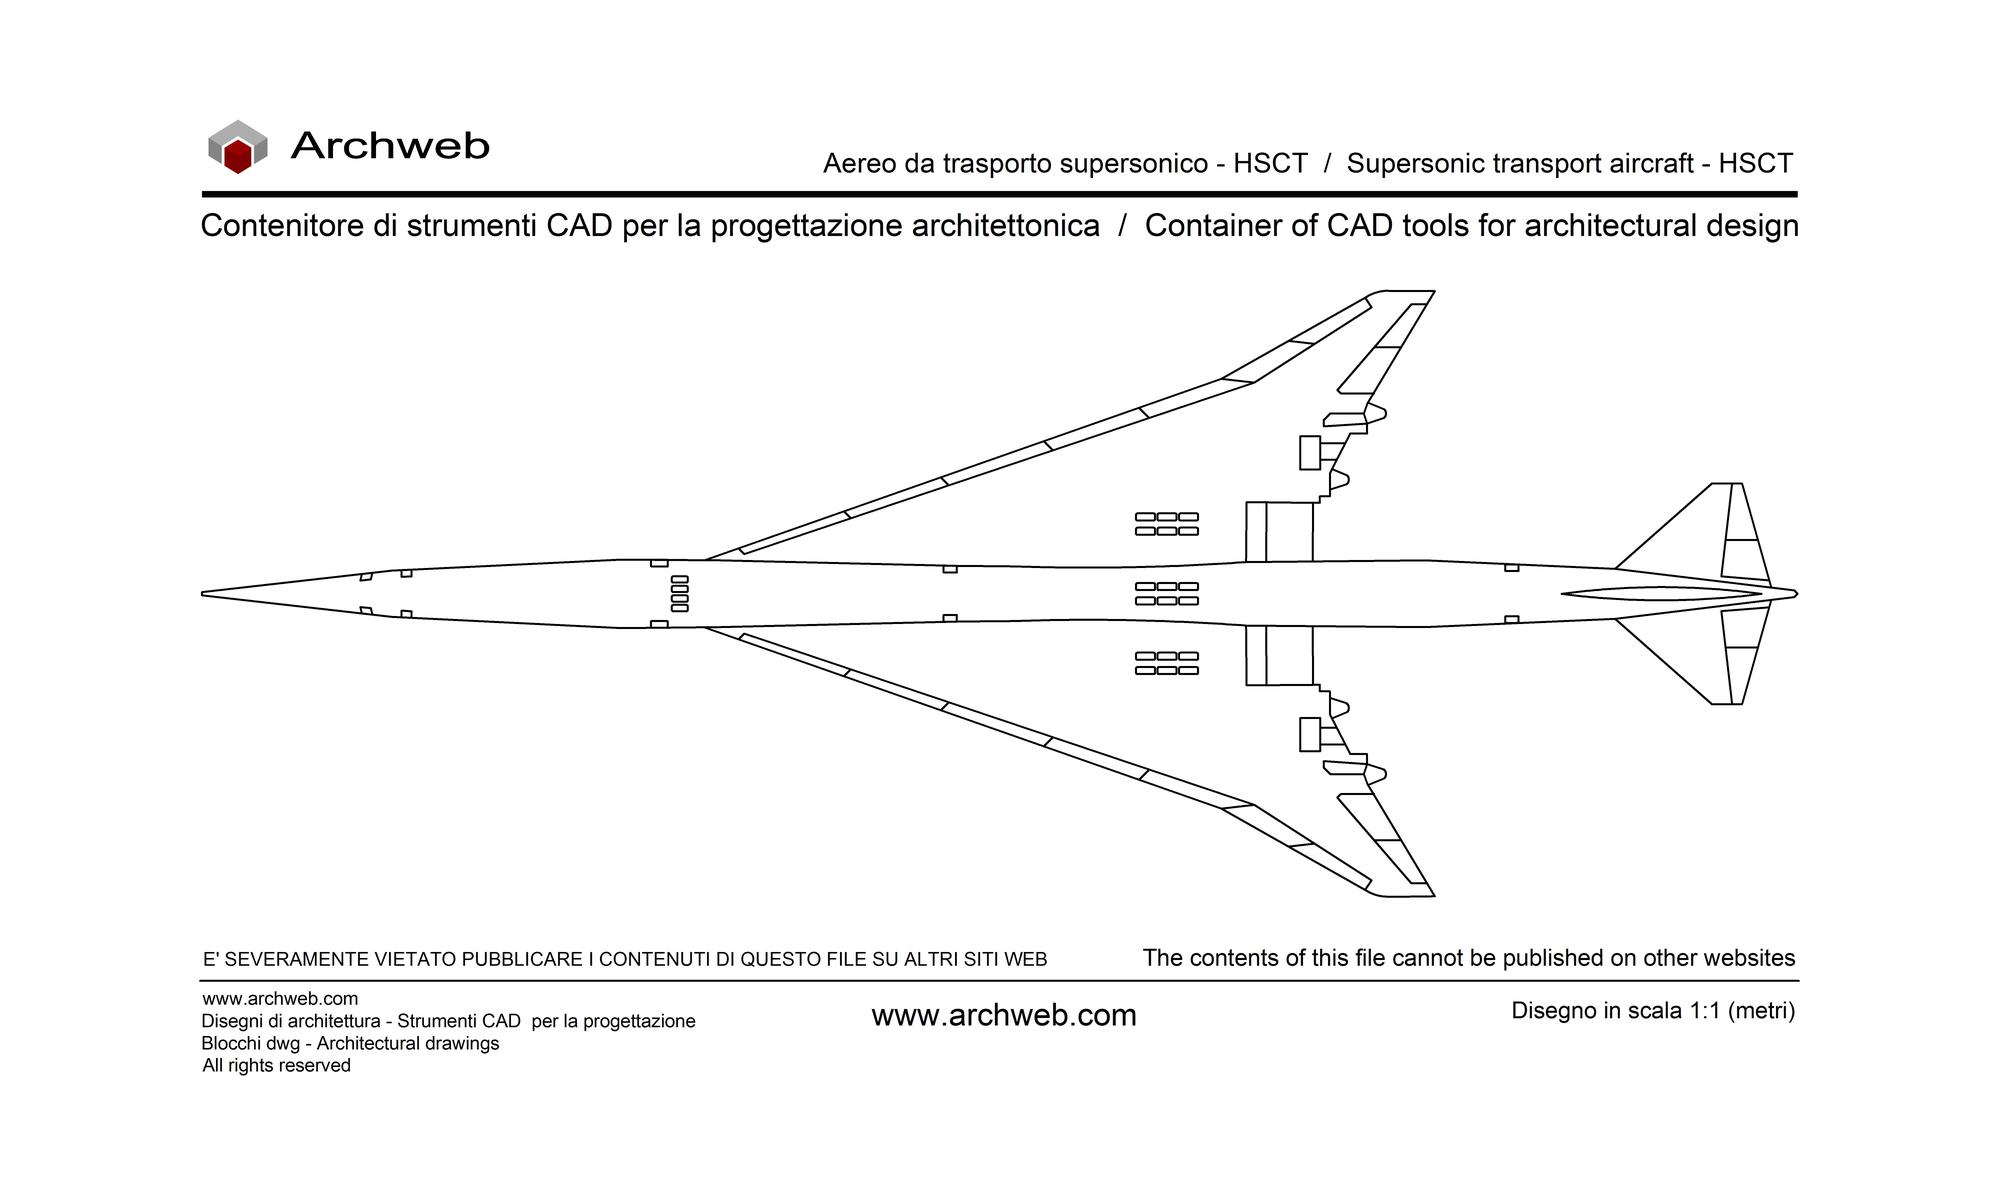 HSCT airplane dwg